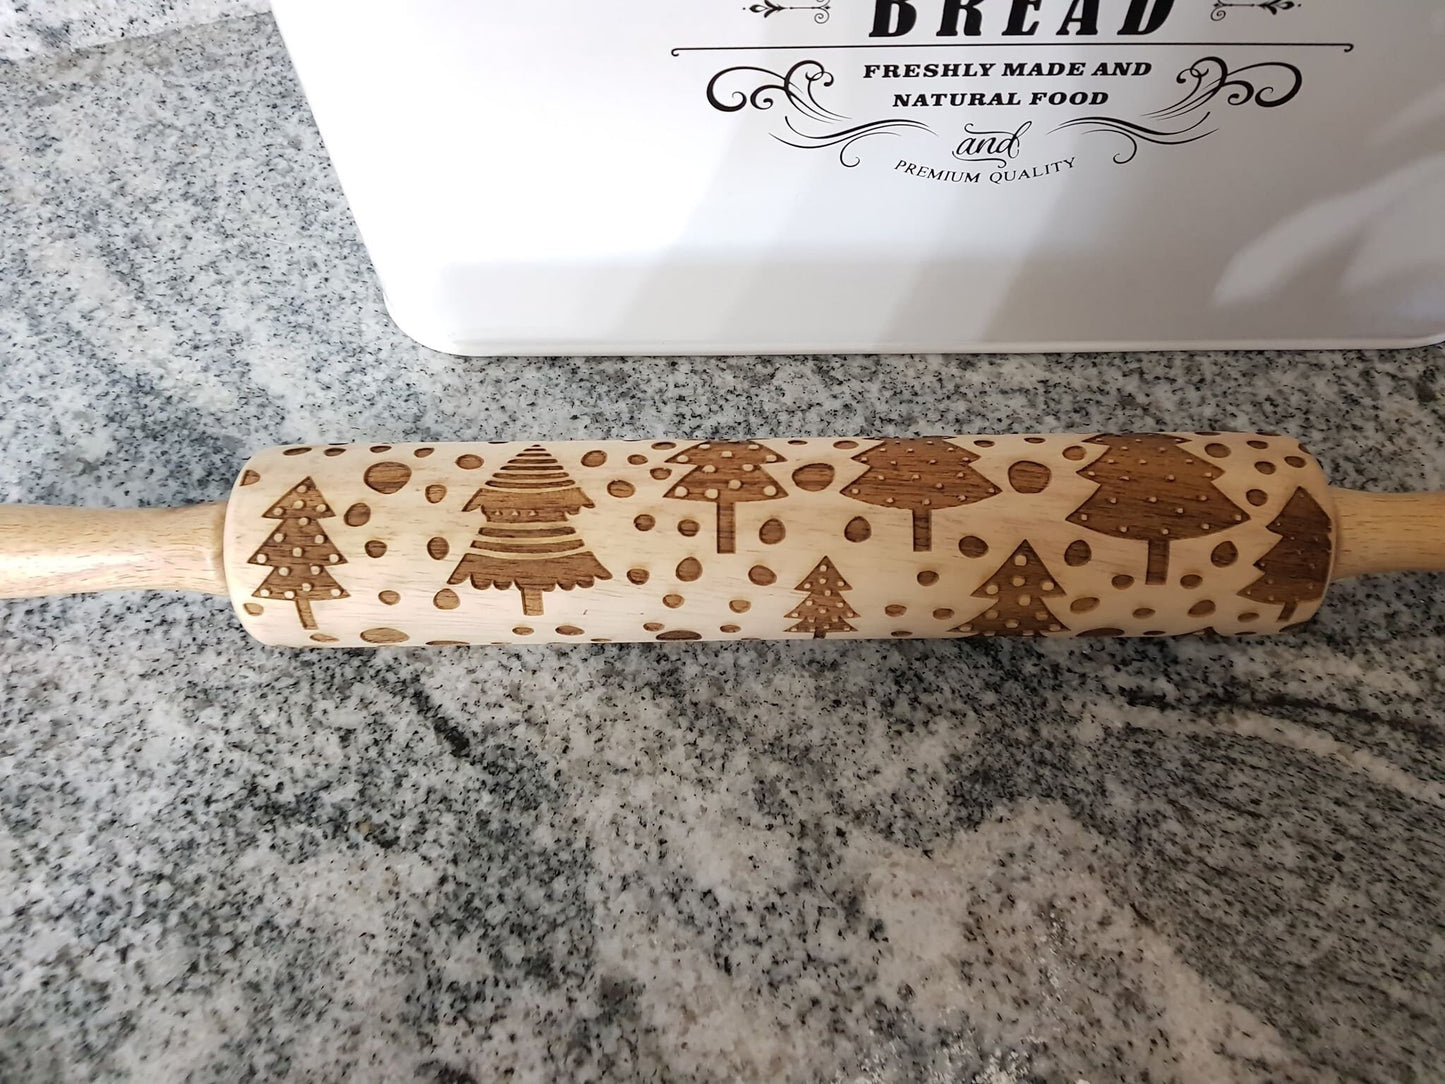 Christmas Tree, Winter, Rolling Pin, Embossed, Engraved, Wooden Rolling Pin, Cookie Stamp, Laser, Hardwood 10 inch, Design, Pottery, Nature